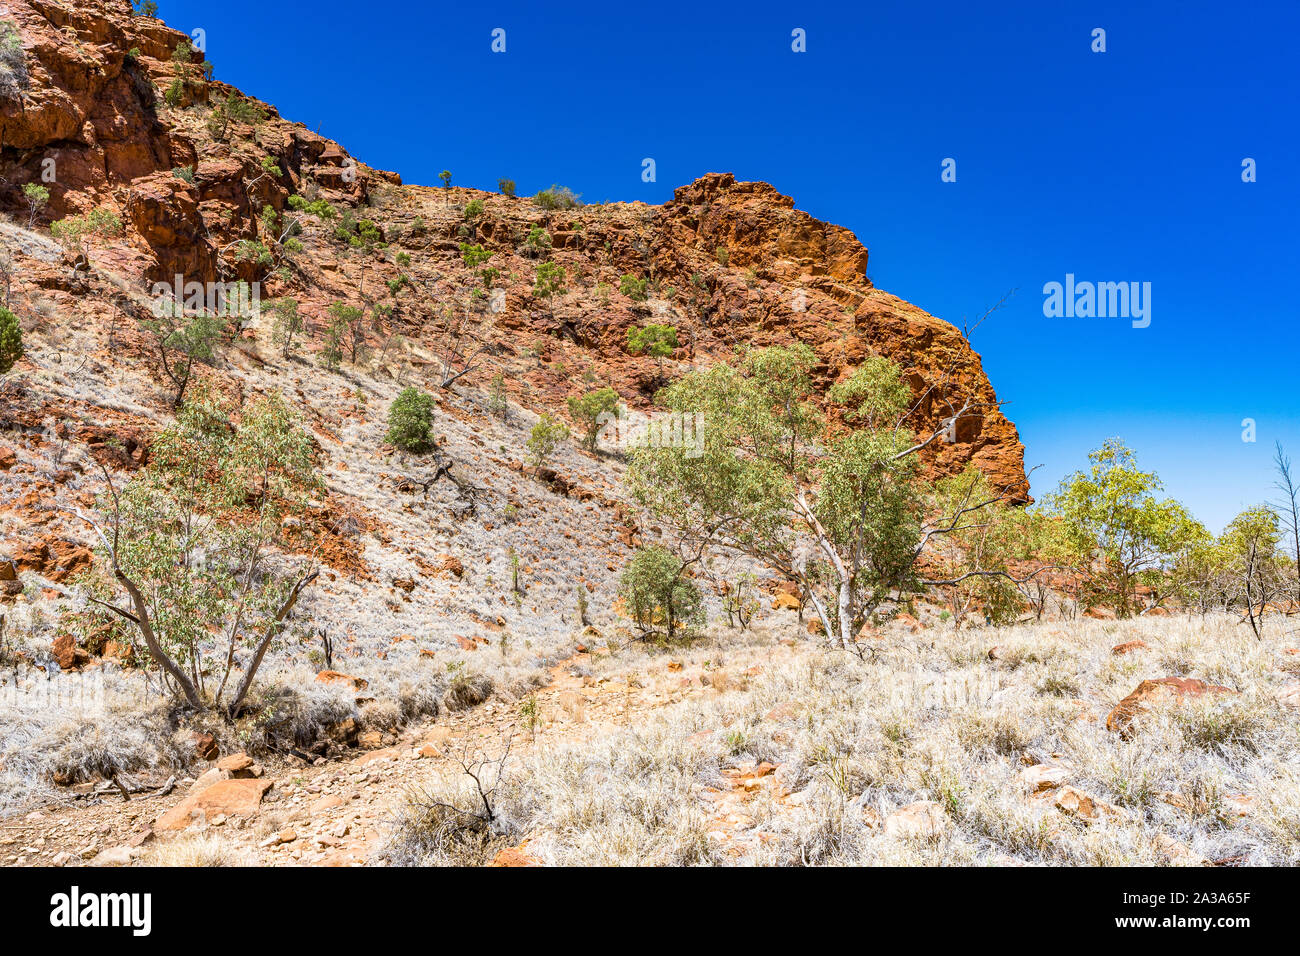 N'Dhala Gorge in the East MacDonnell Ranges in the Northern Territory, Australia. Stock Photo